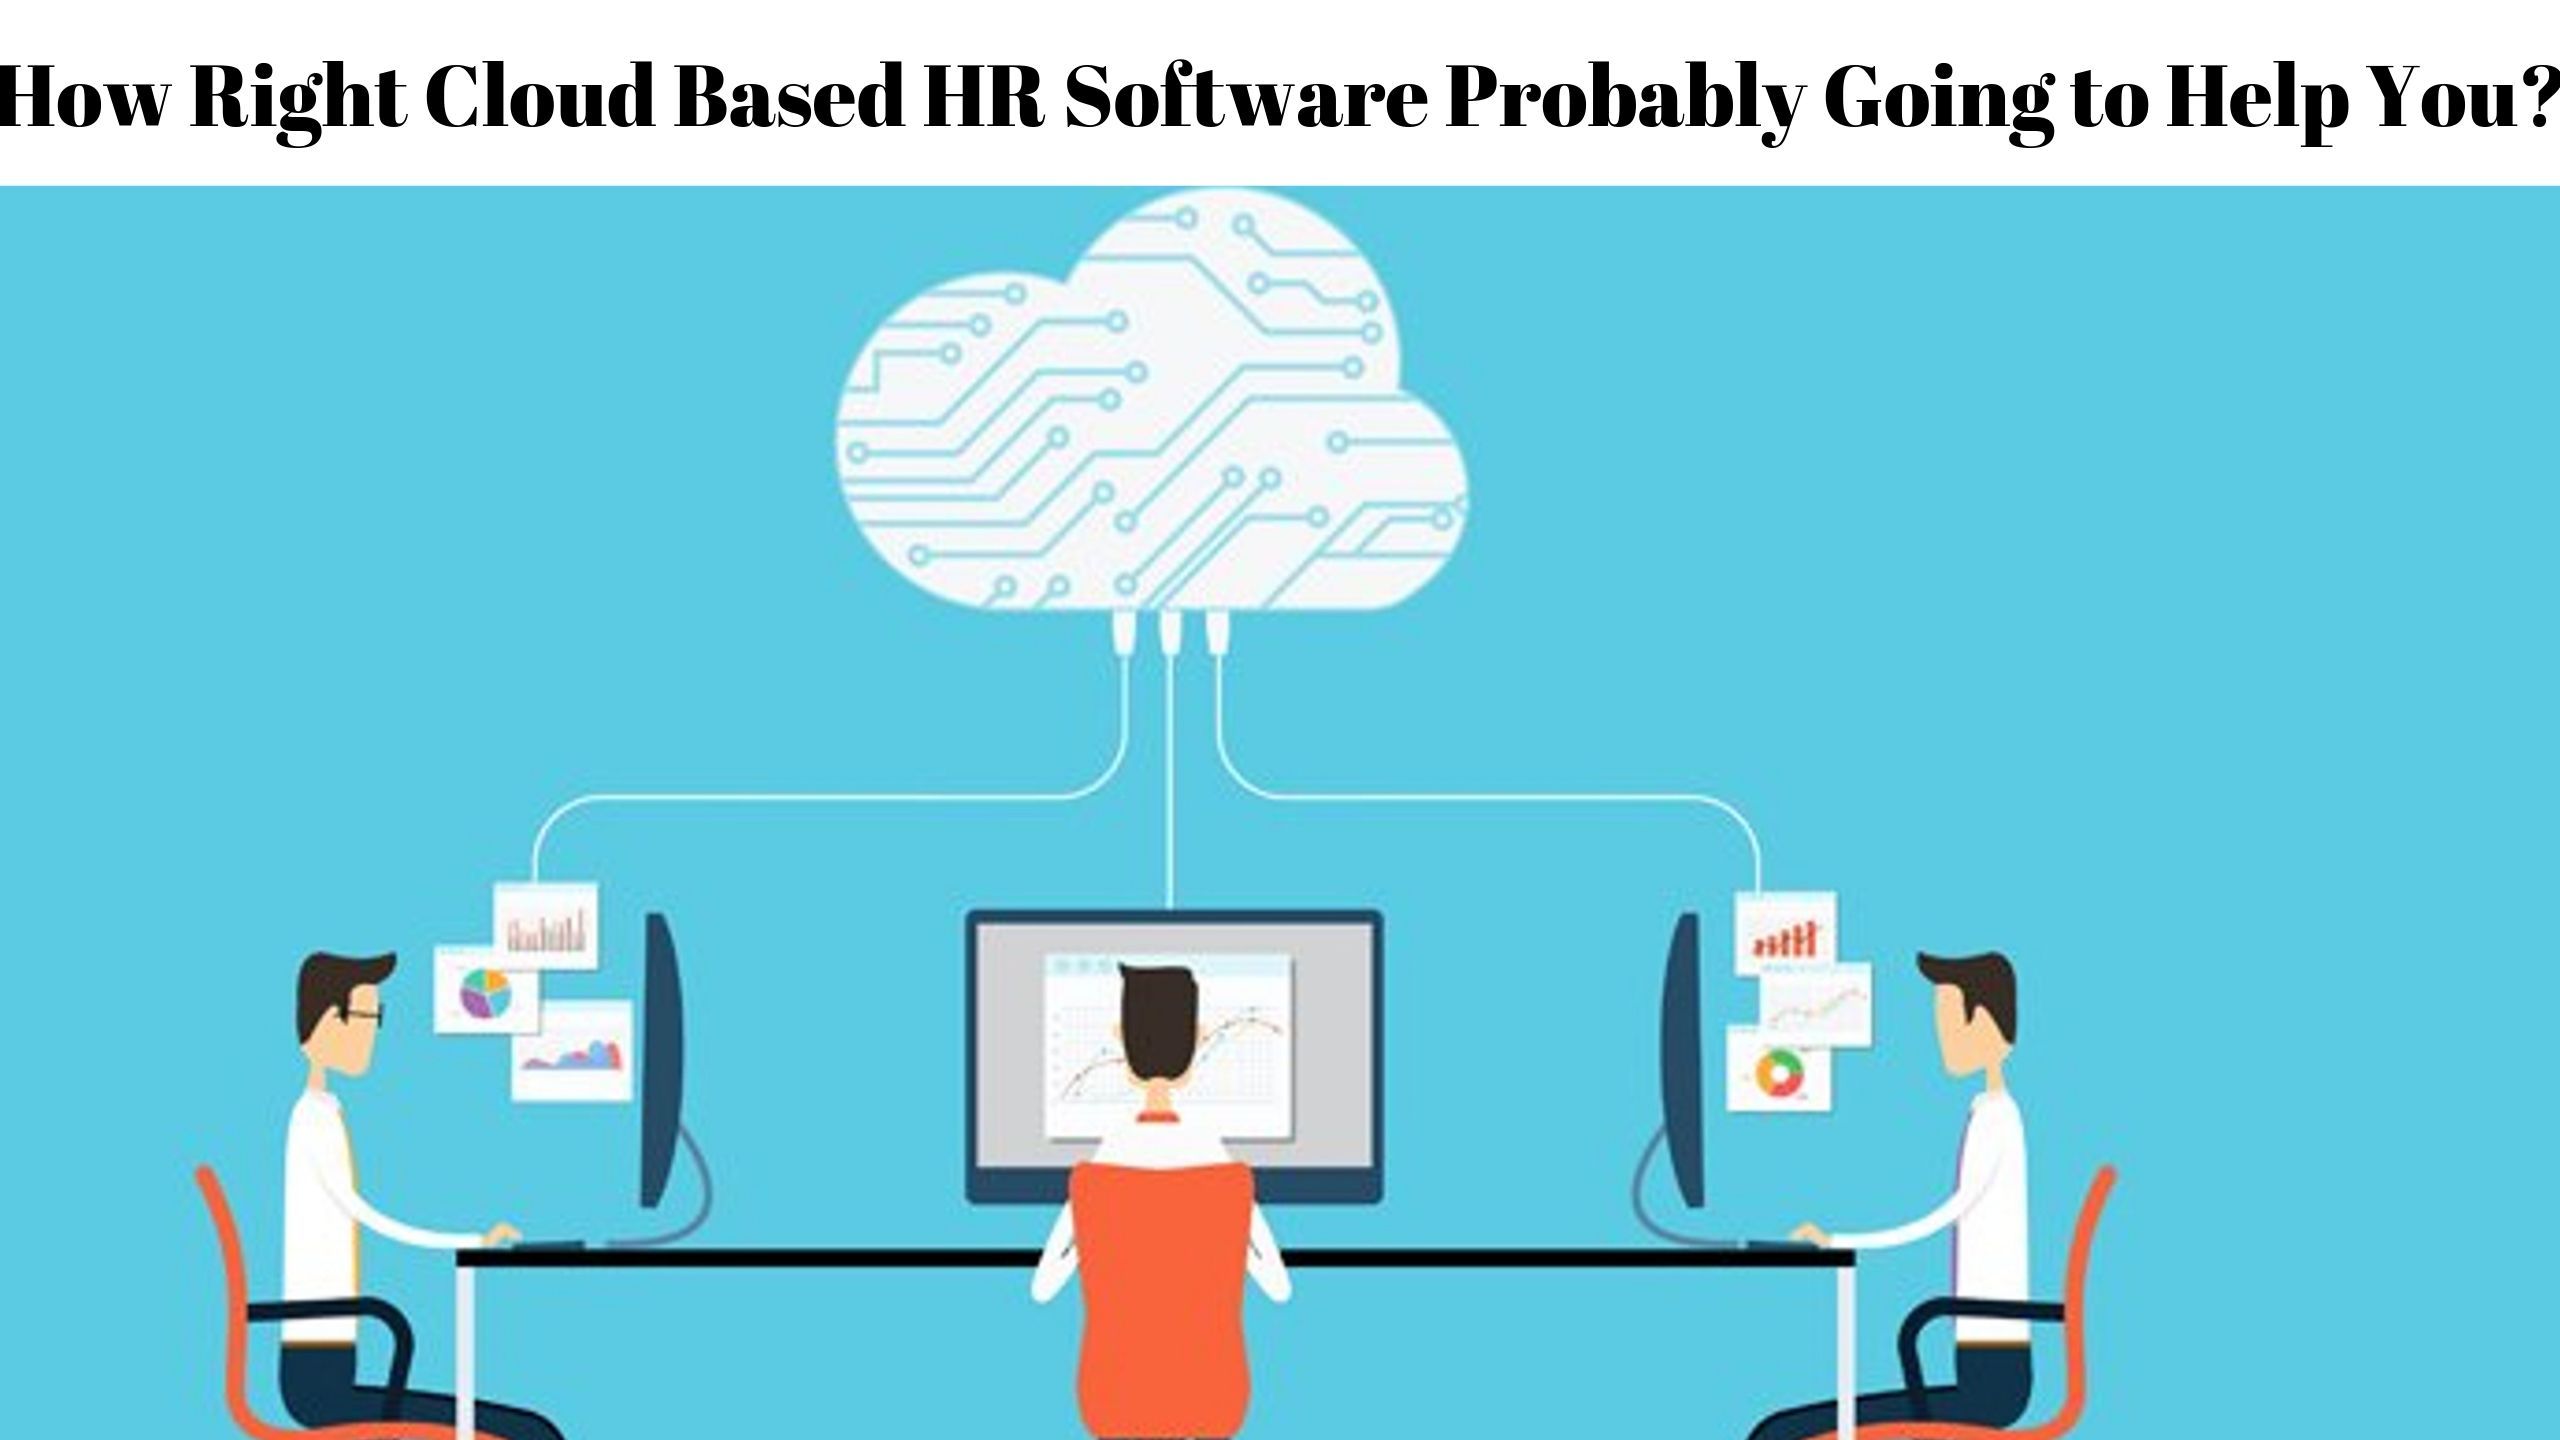 How Right Cloud Based HR Software Probably Going to Help You